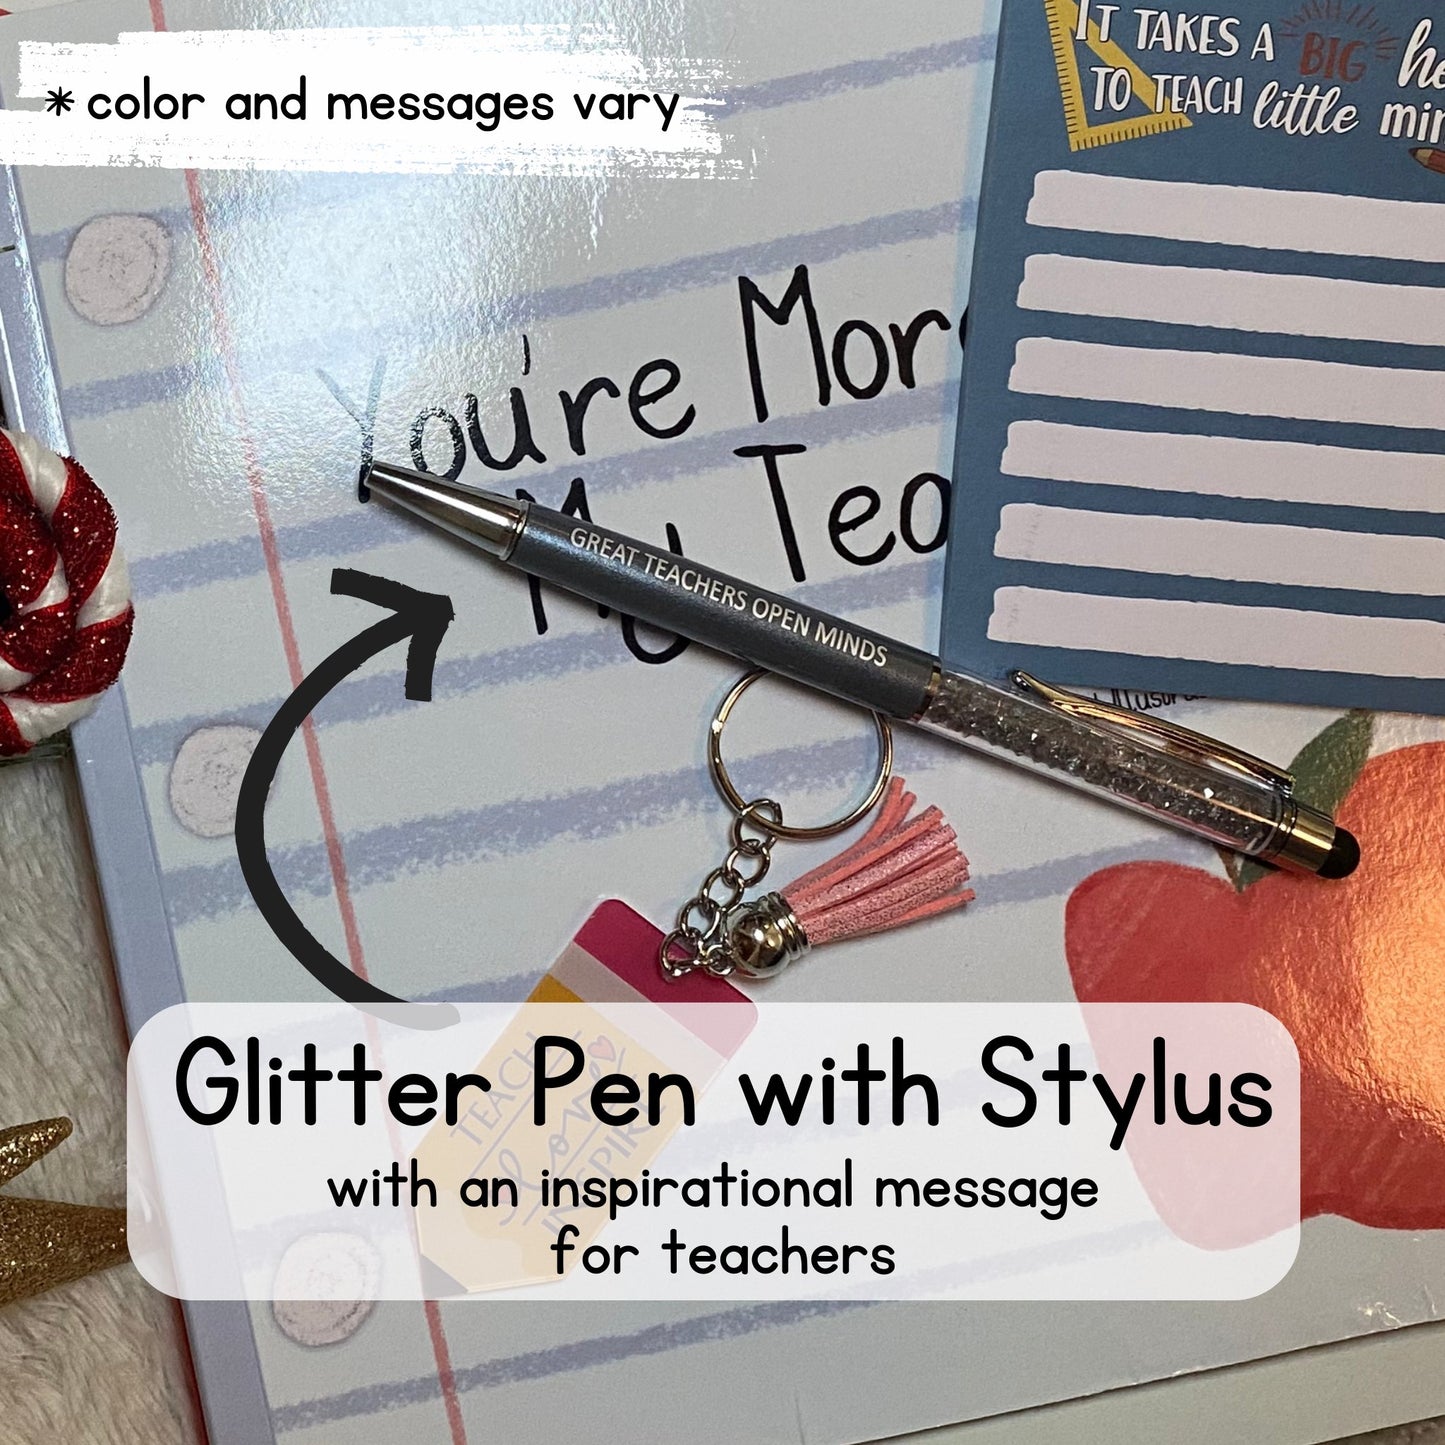 Image of one of the teacher themed glitter pen and stylus options included in the teacher gift set self published through Amazon KDP and Kindle Direct Publishing that includes an autographed copy of "You're More Than My Teacher."